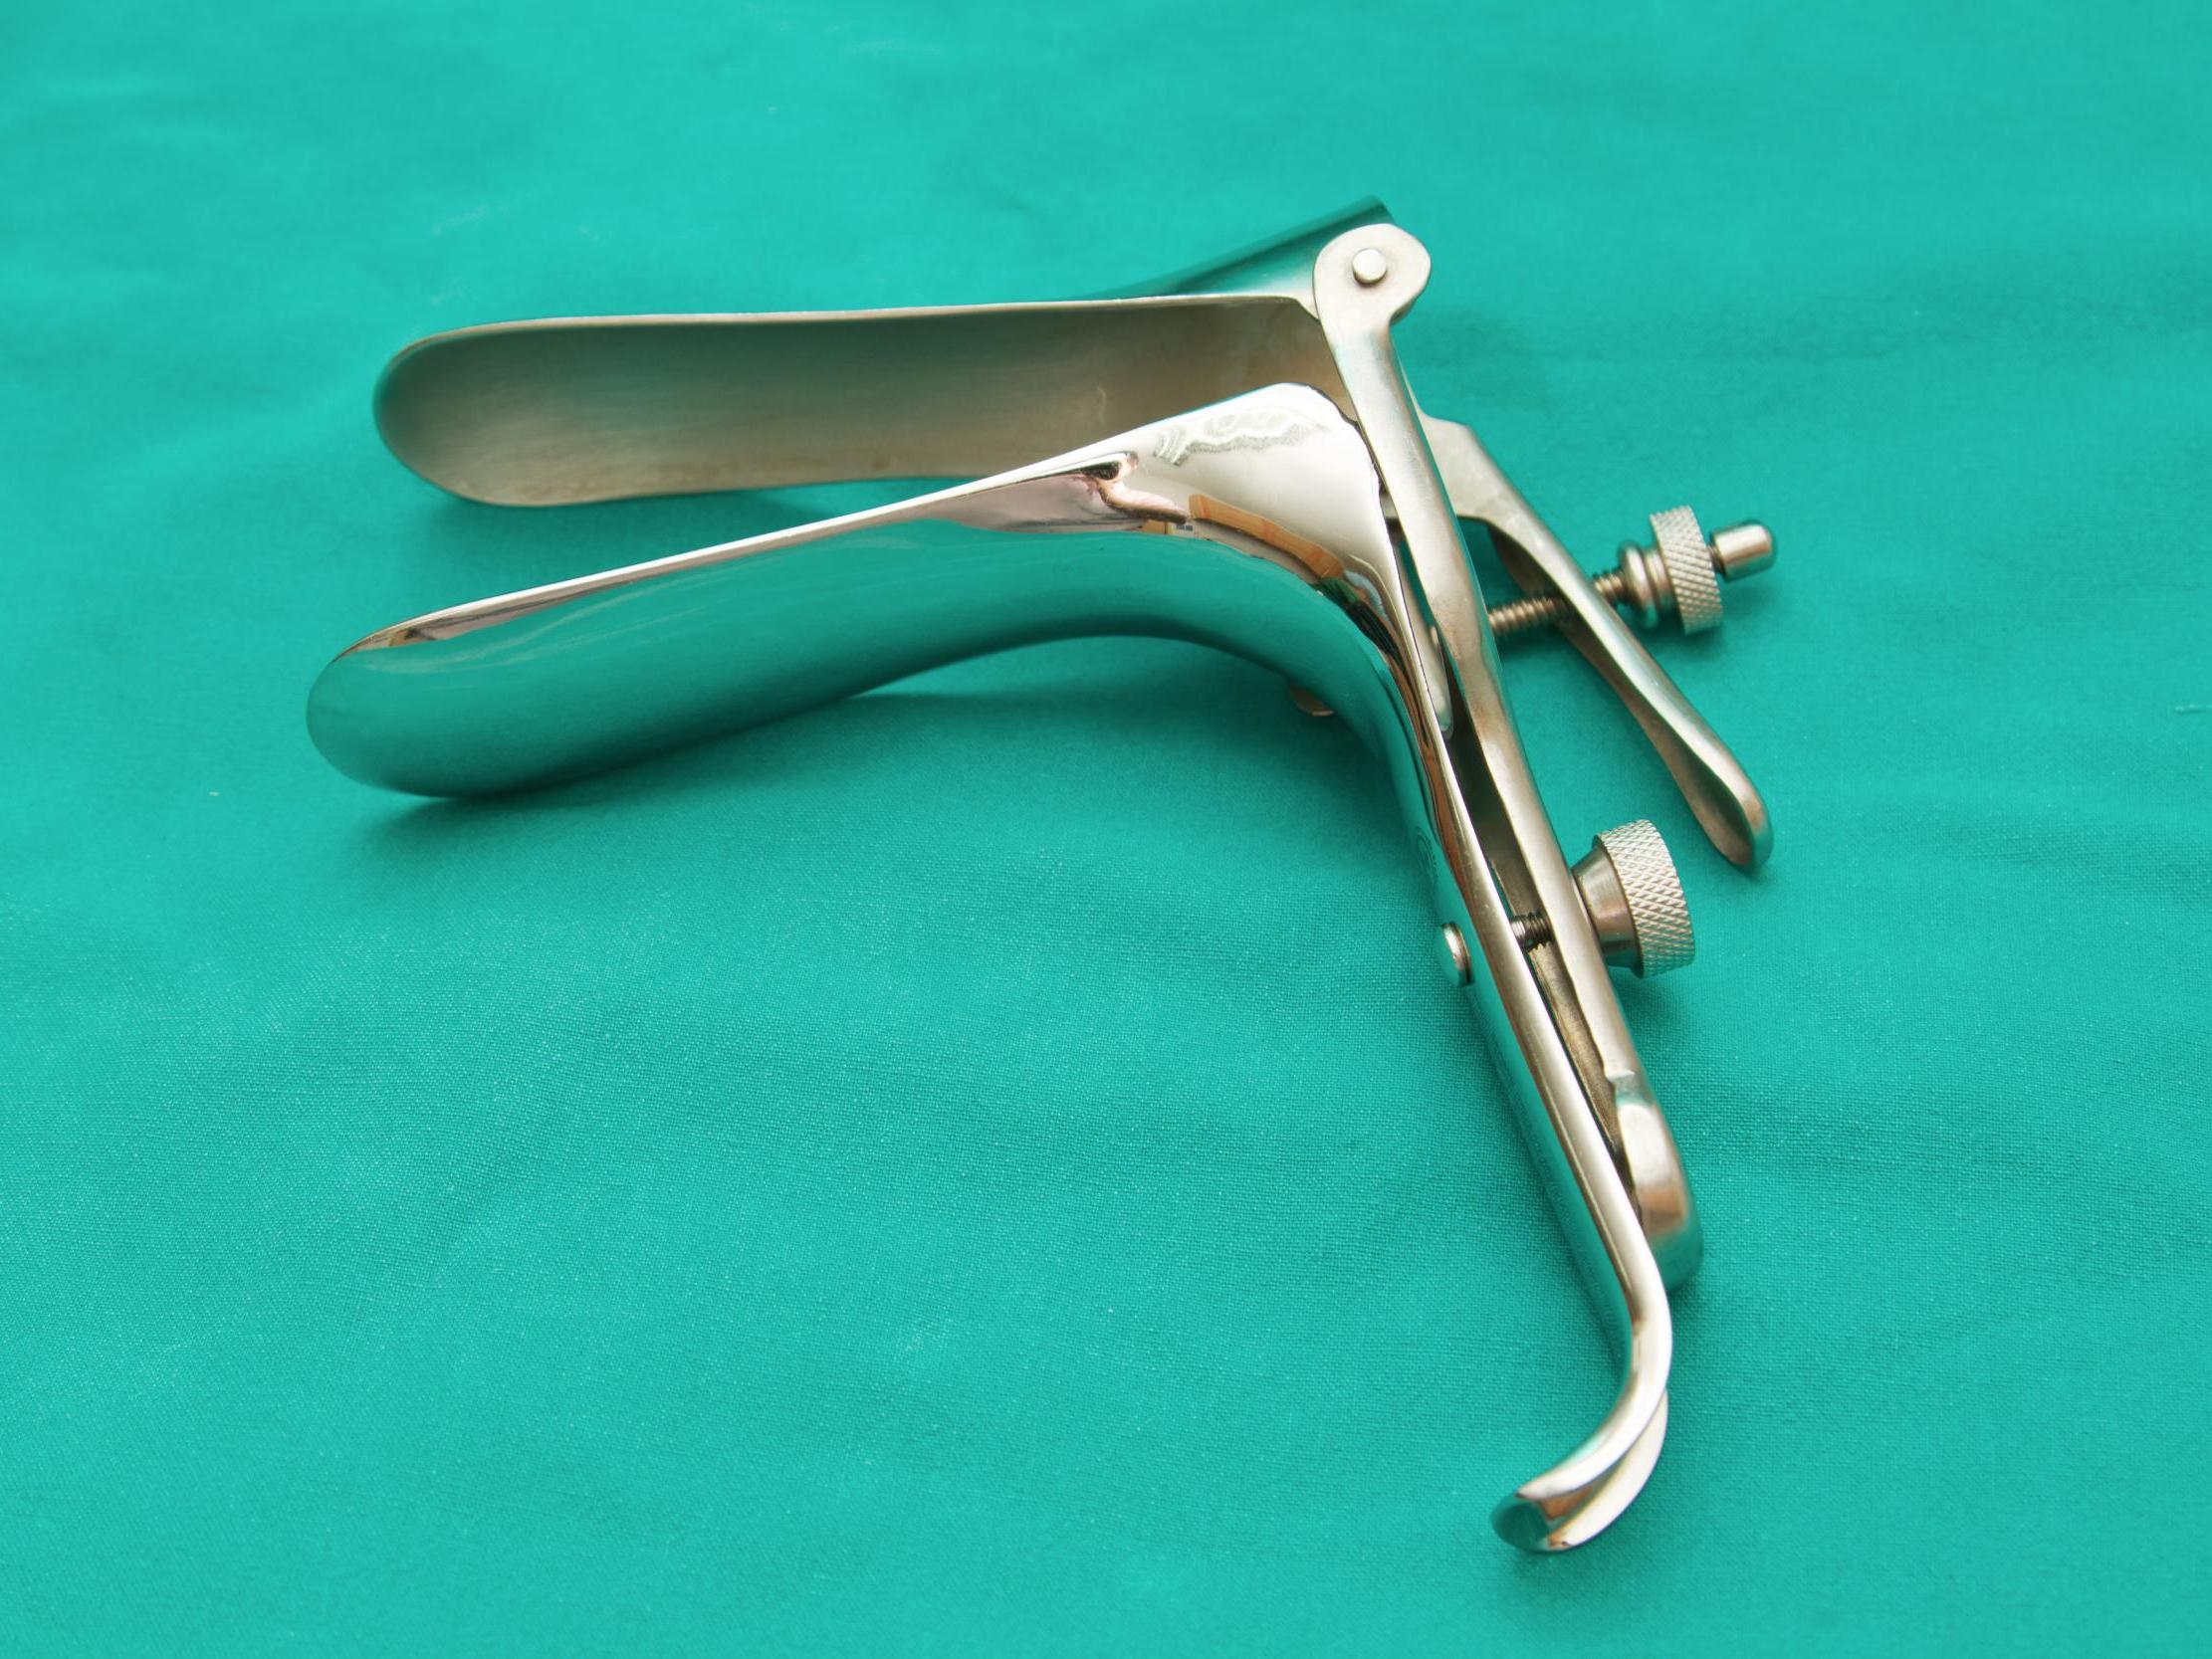 Cervical Screening How Enduring Use Of Year Old Speculum Puts Women Off Smear Tests